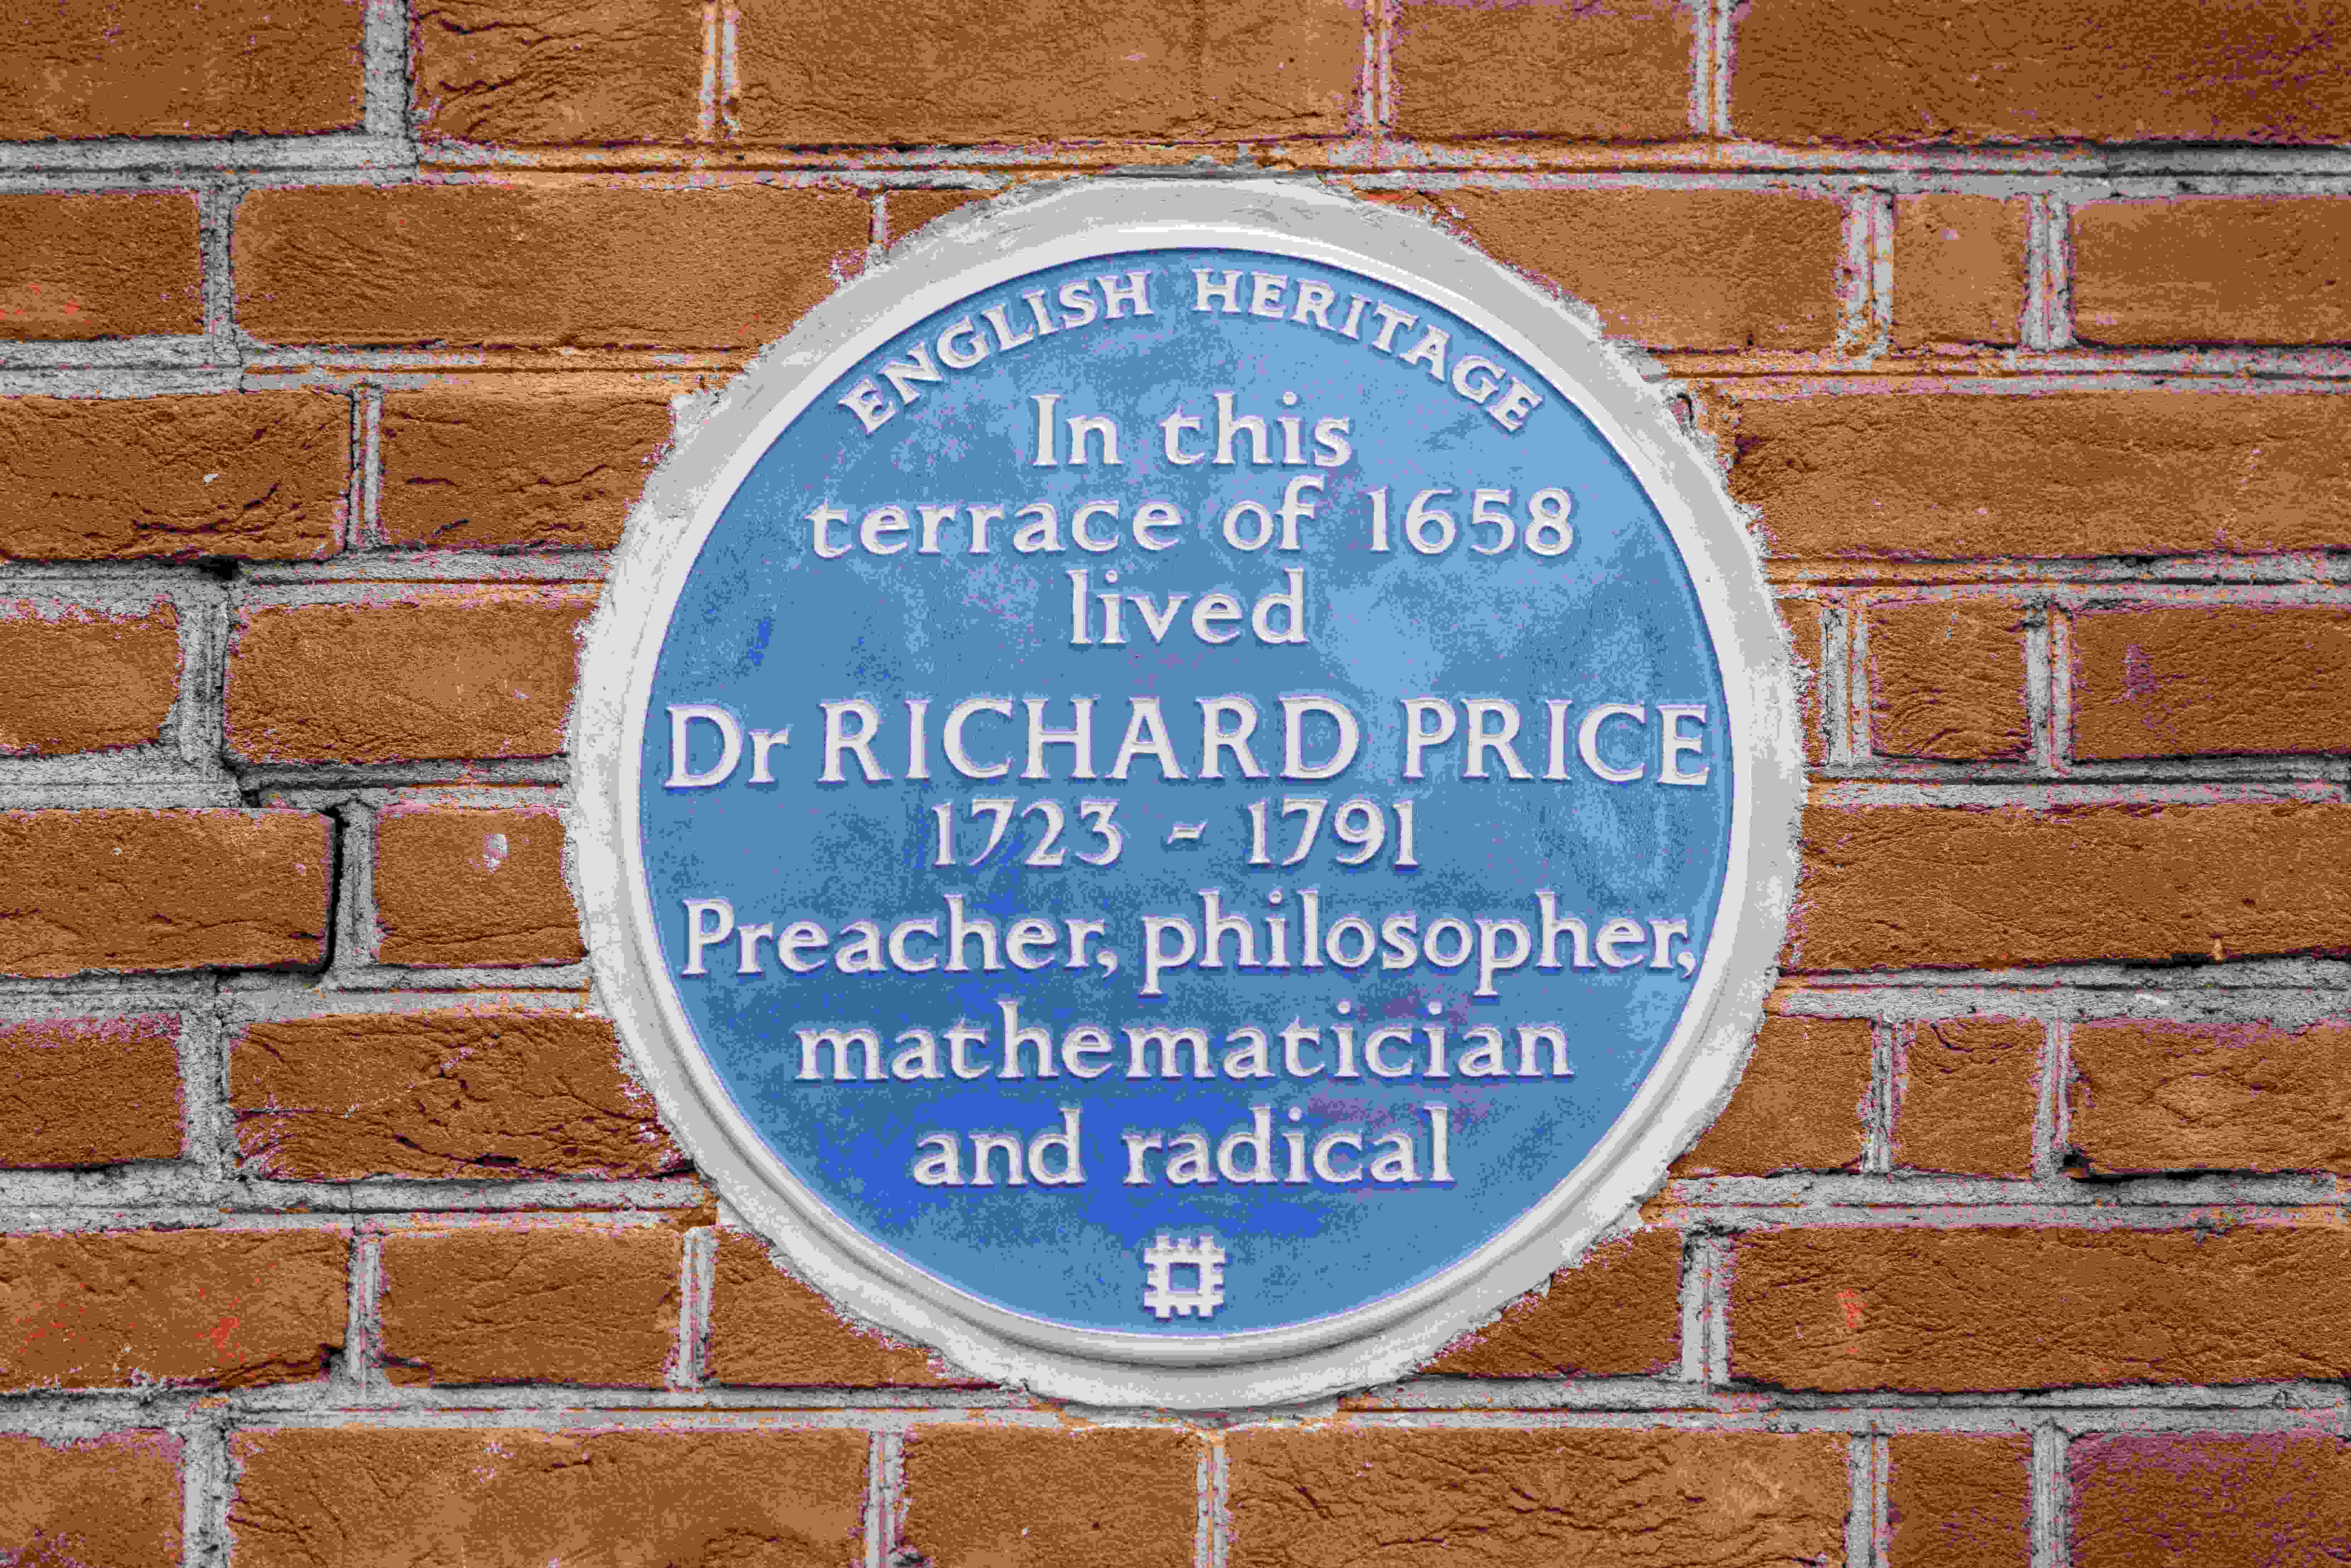 Dr Richard Price's London blue plaque. It reads: "In this terrace of 1658 lived Dr Richard Price, 1723-1791. Preacher, philosopher, mathematician and radical."